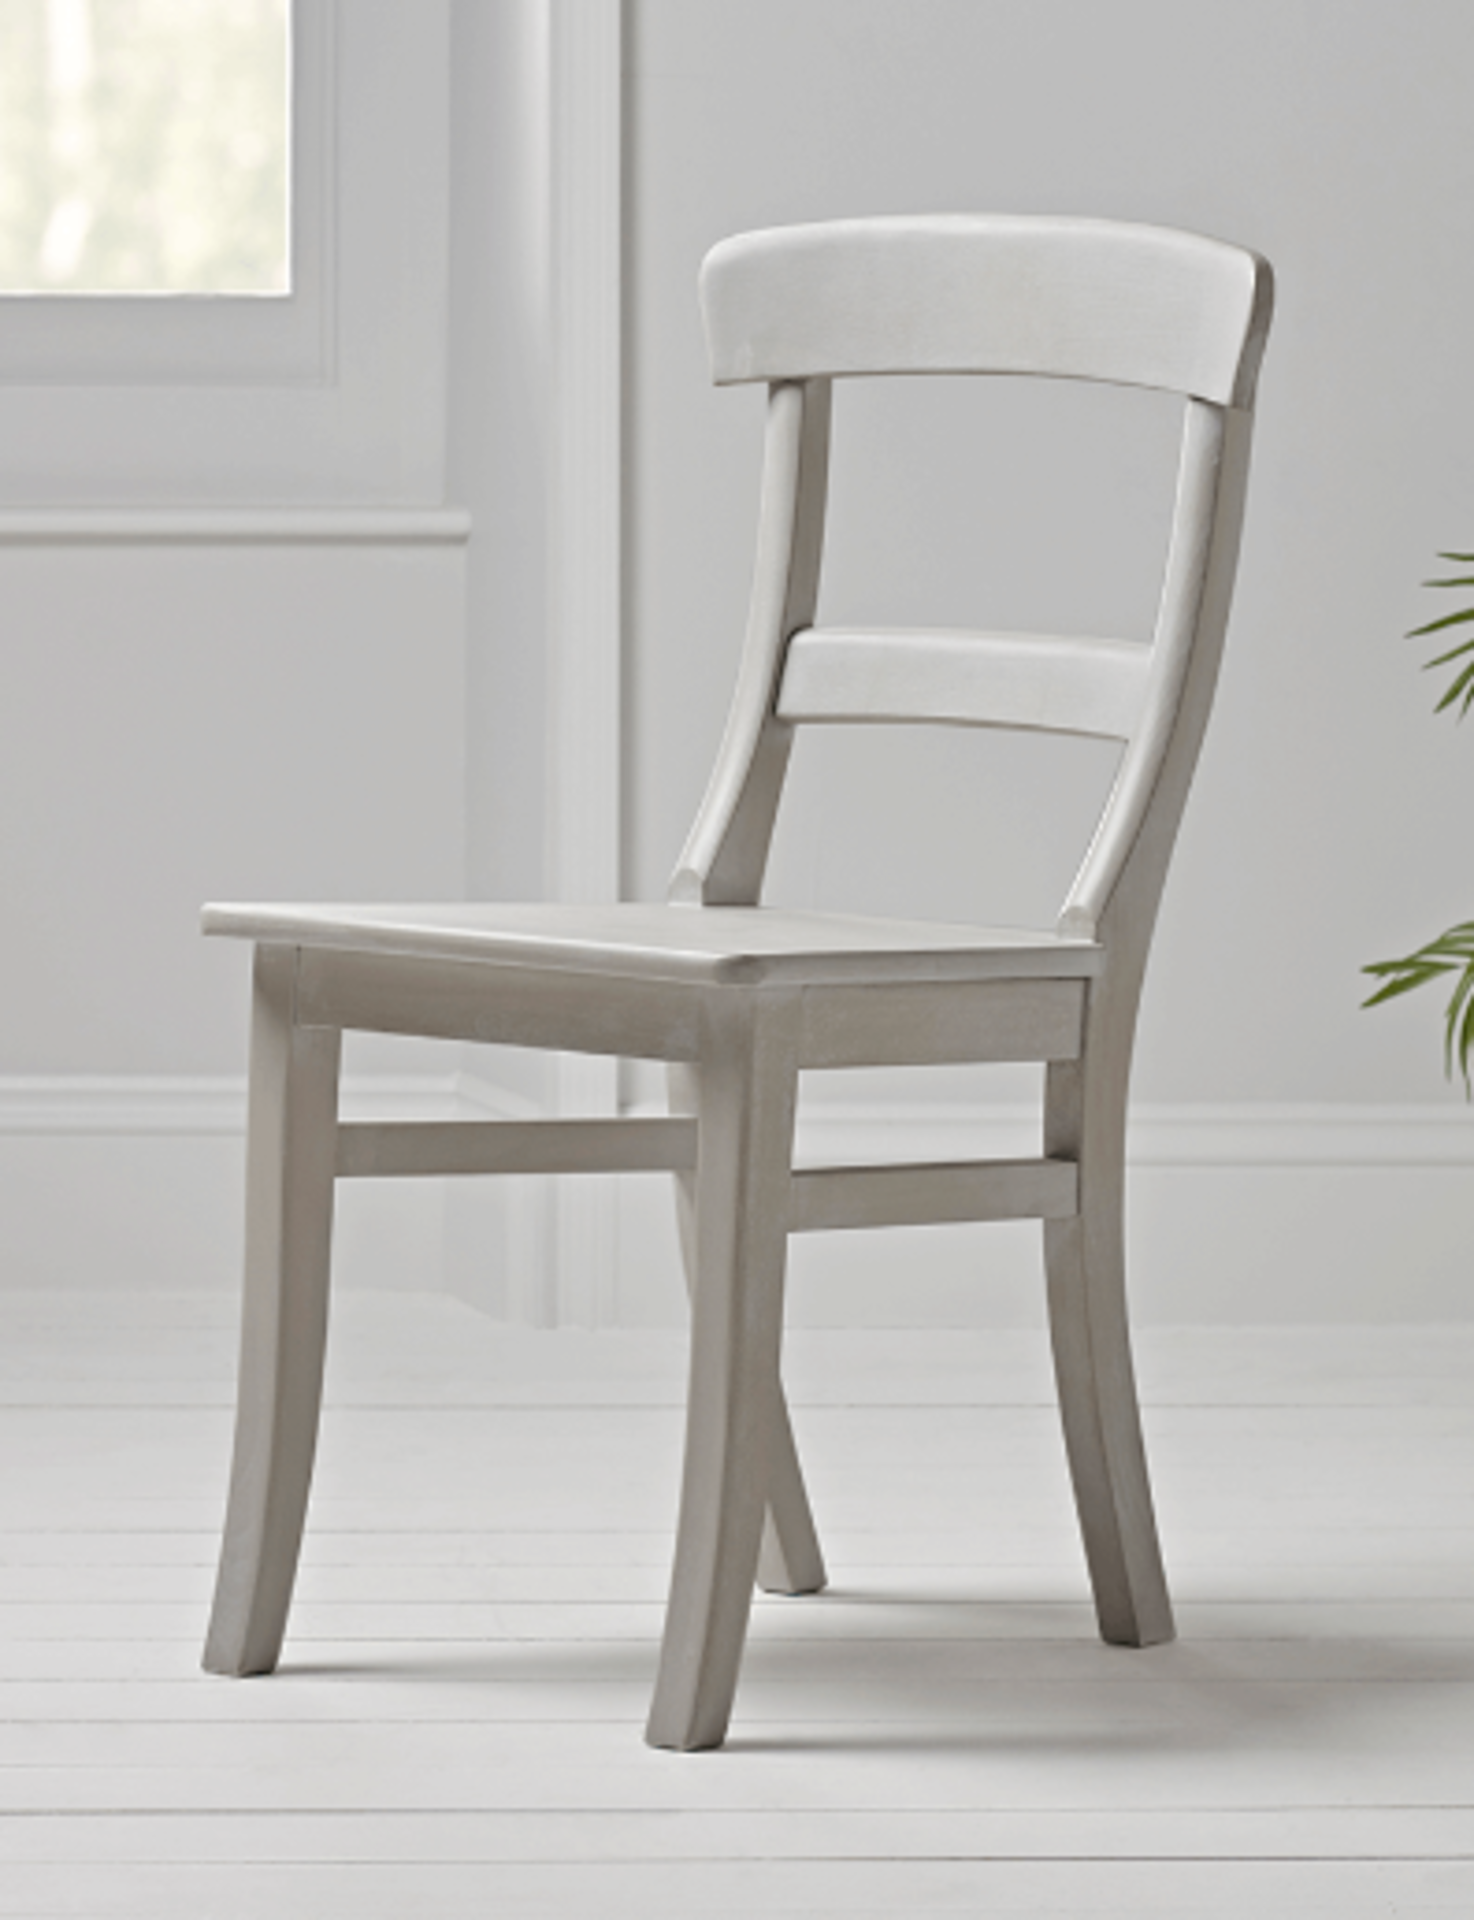 Cox & Cox Lotte Wooden Dining Chair. RRP £300.00. Our elegant Lotte Wooden Dining Chair has all